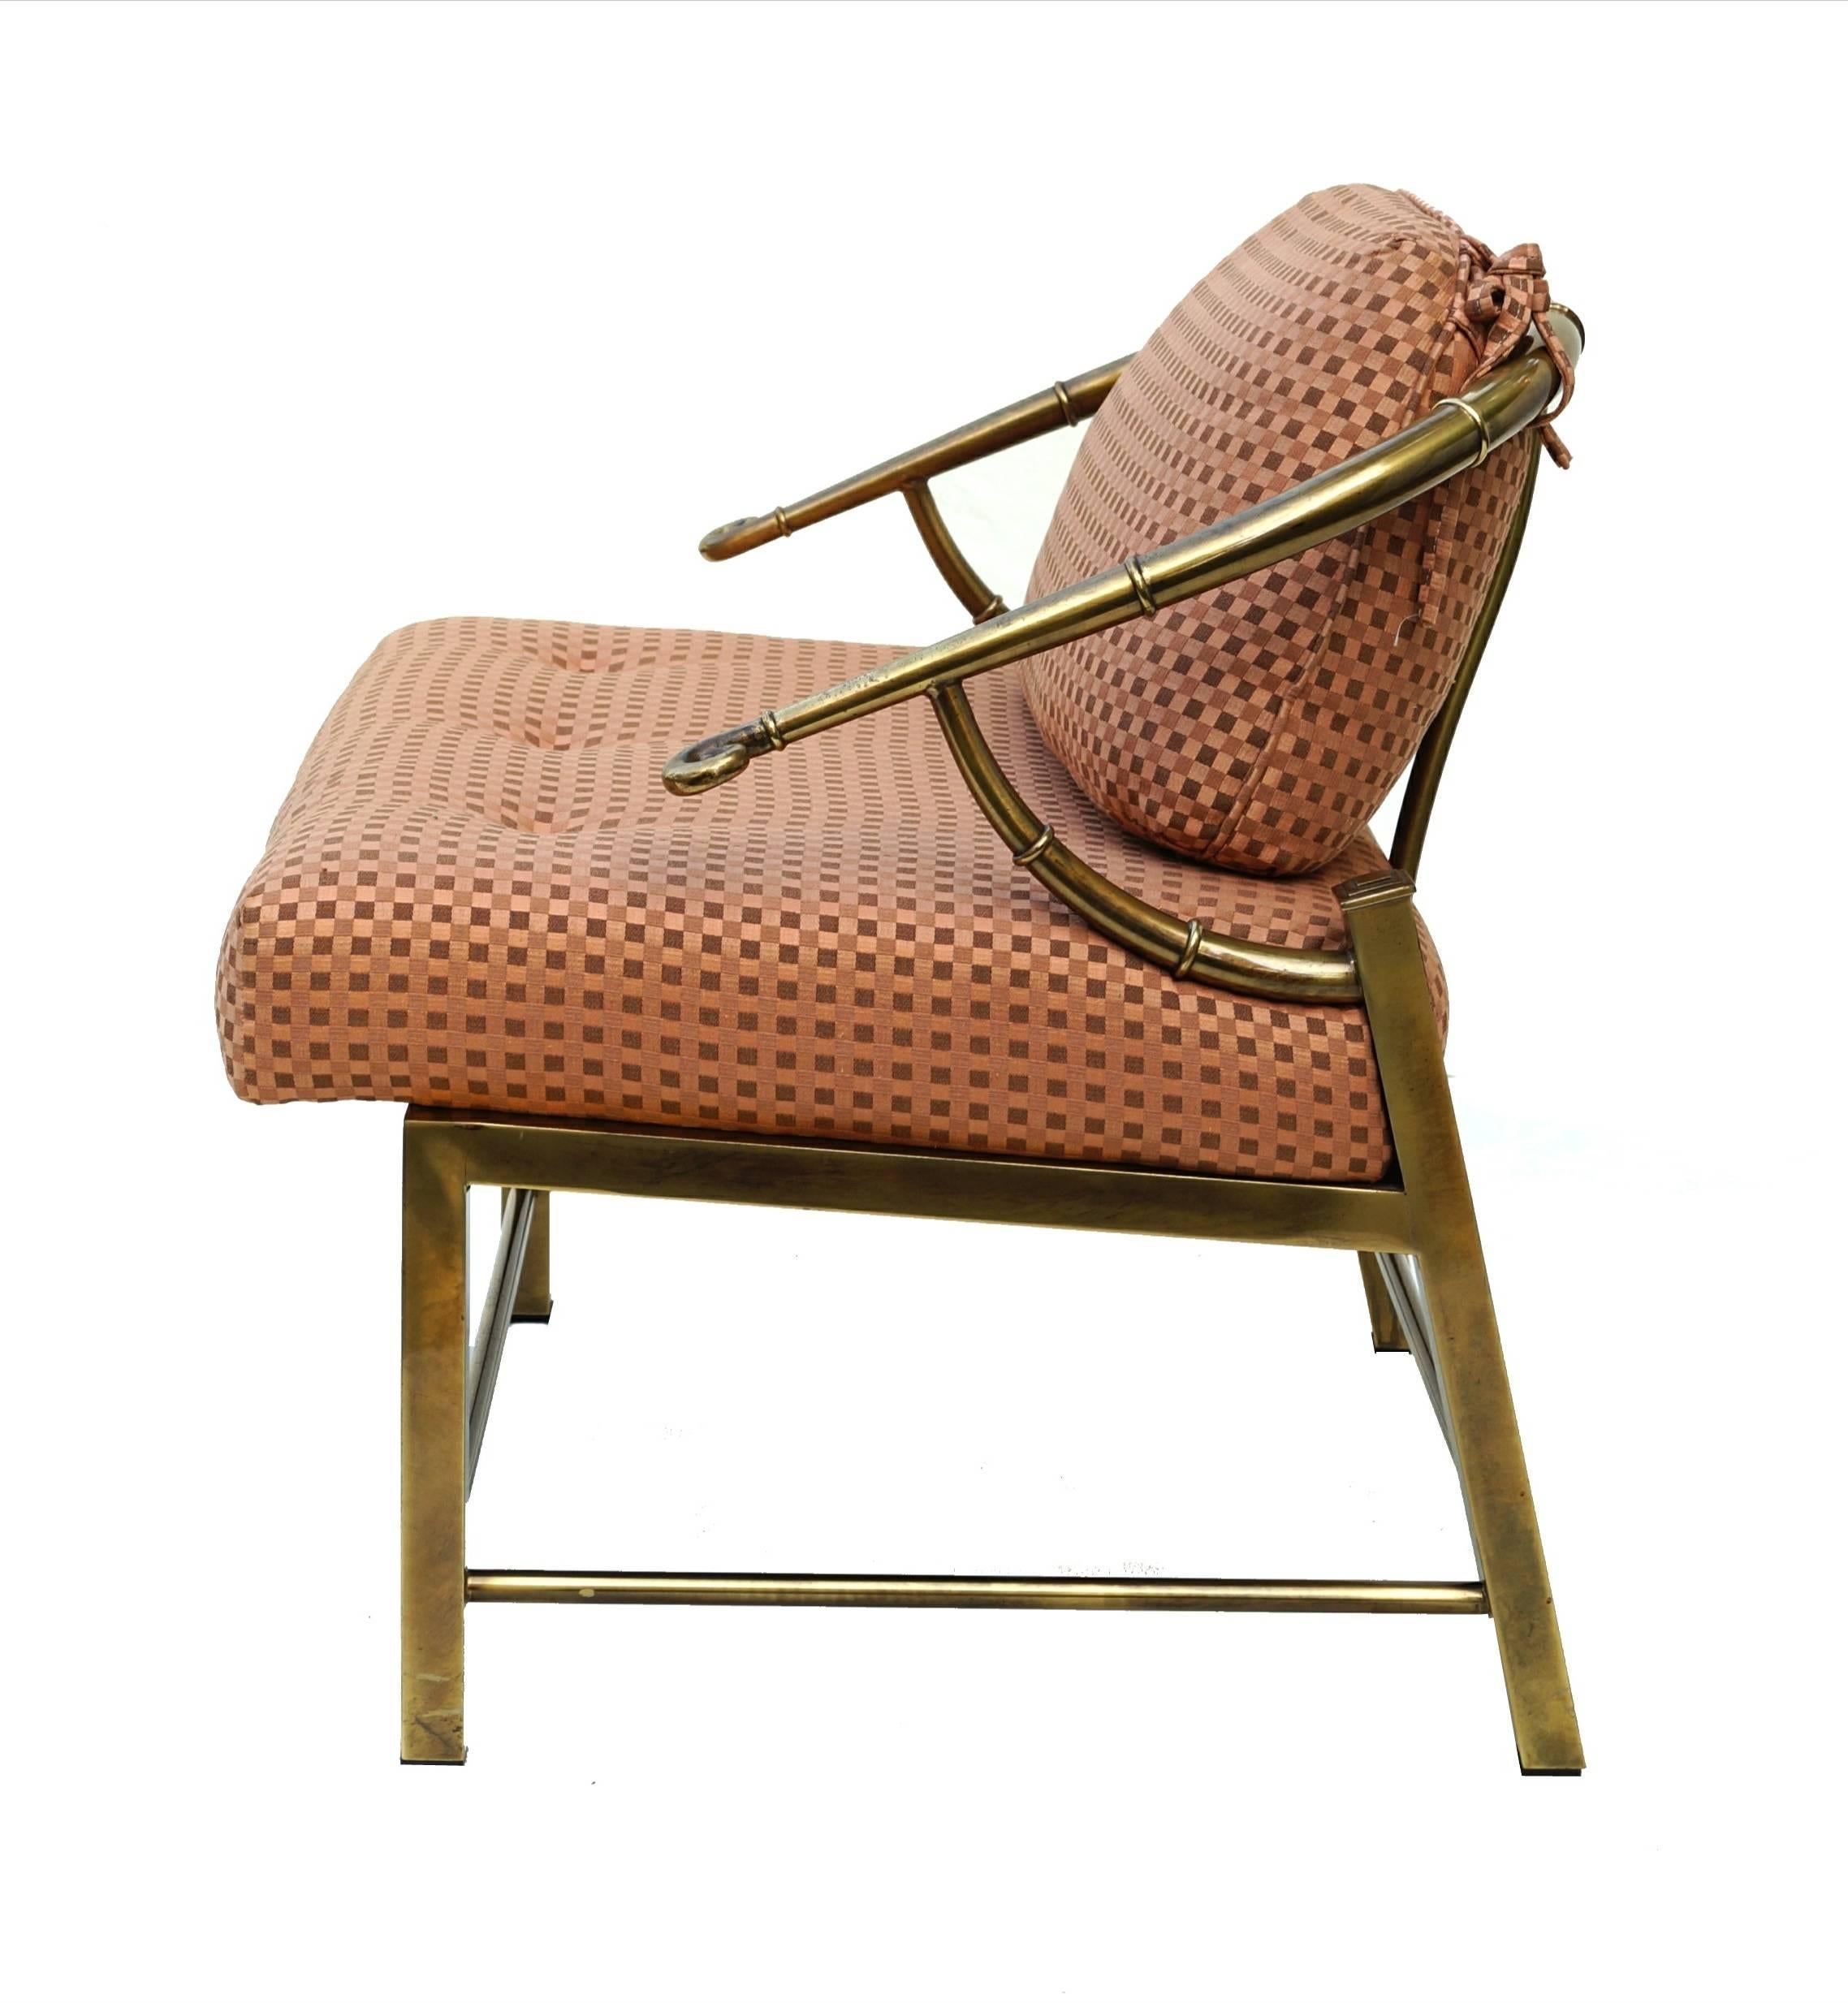 Horseshoe Empress chair by Mastercraft. Produced in Italy.